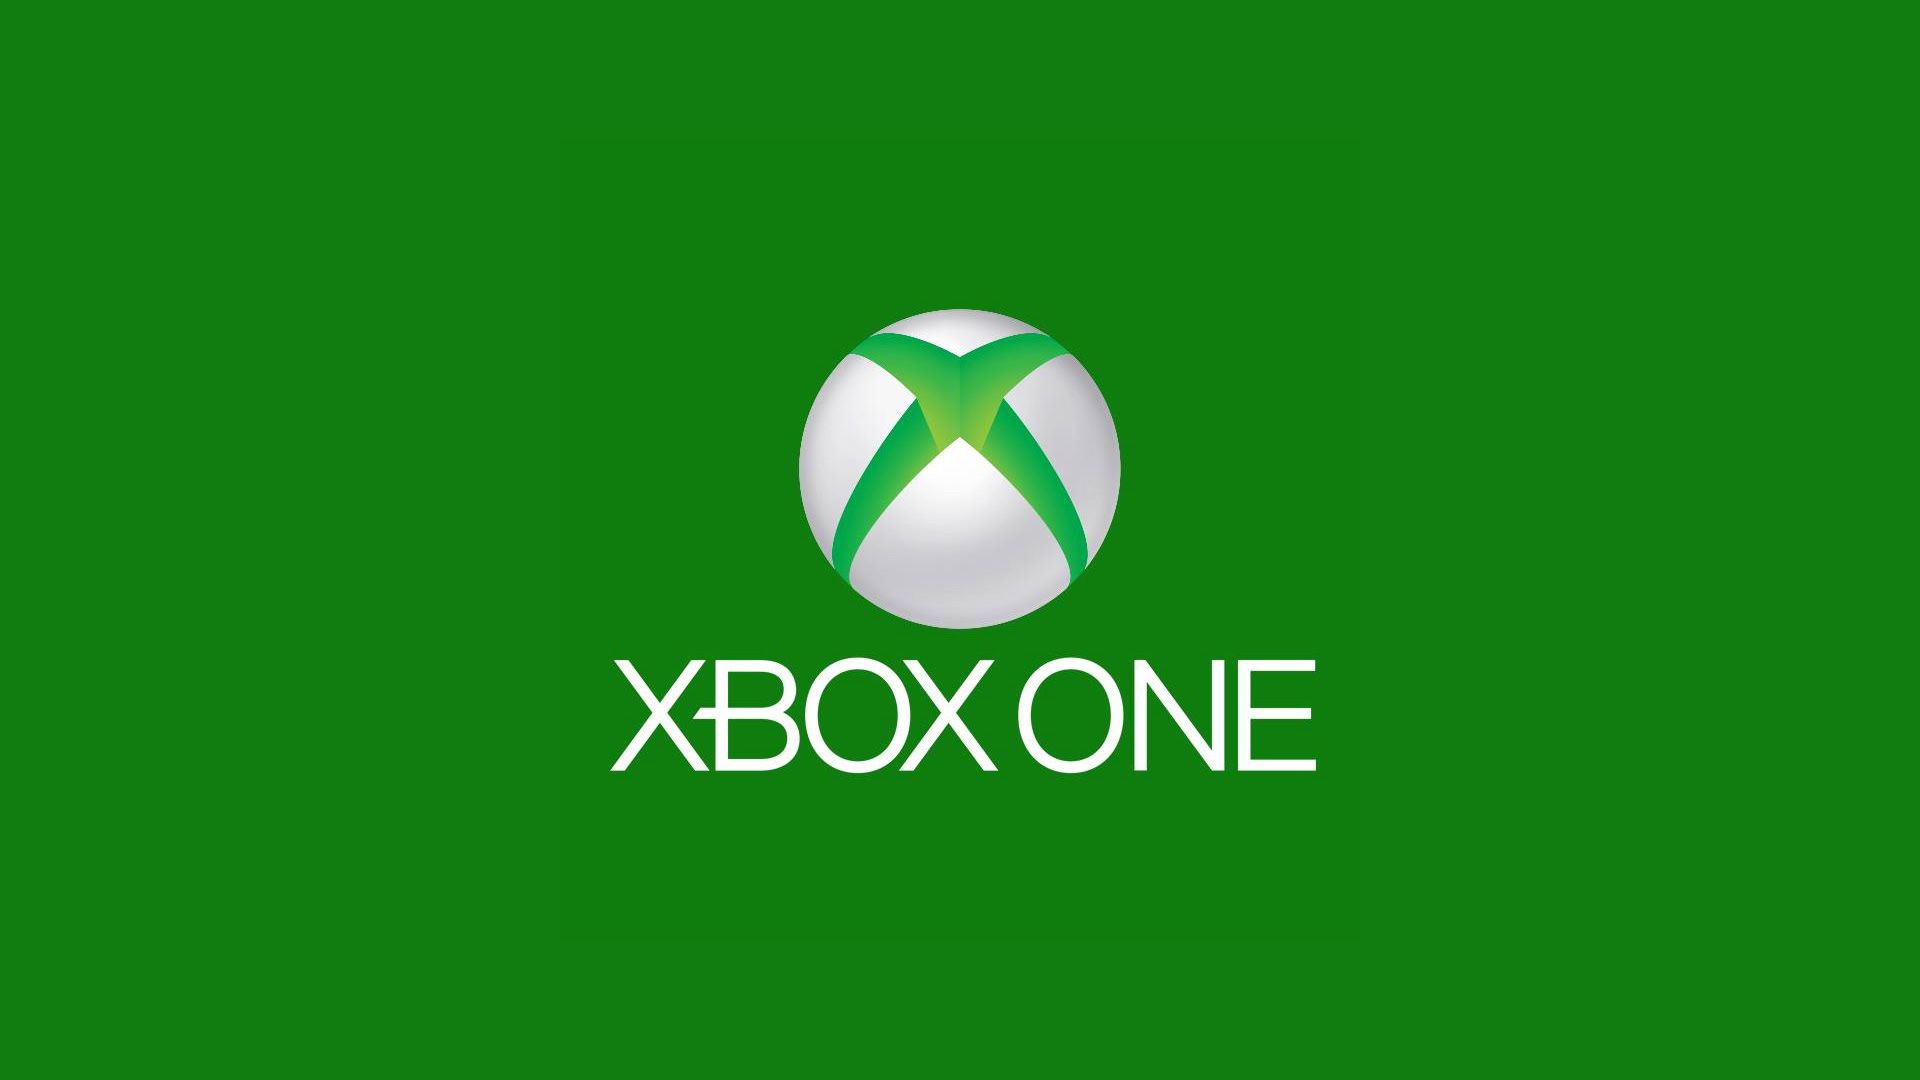 Free download Xbox One Logo 1080p Wallpaper Xbox One Logo 720p Wallpaper [1920x1080] for your Desktop, Mobile & Tablet. Explore Xbox 1 Wallpaper Downloads. Download Wallpaper for Xbox One